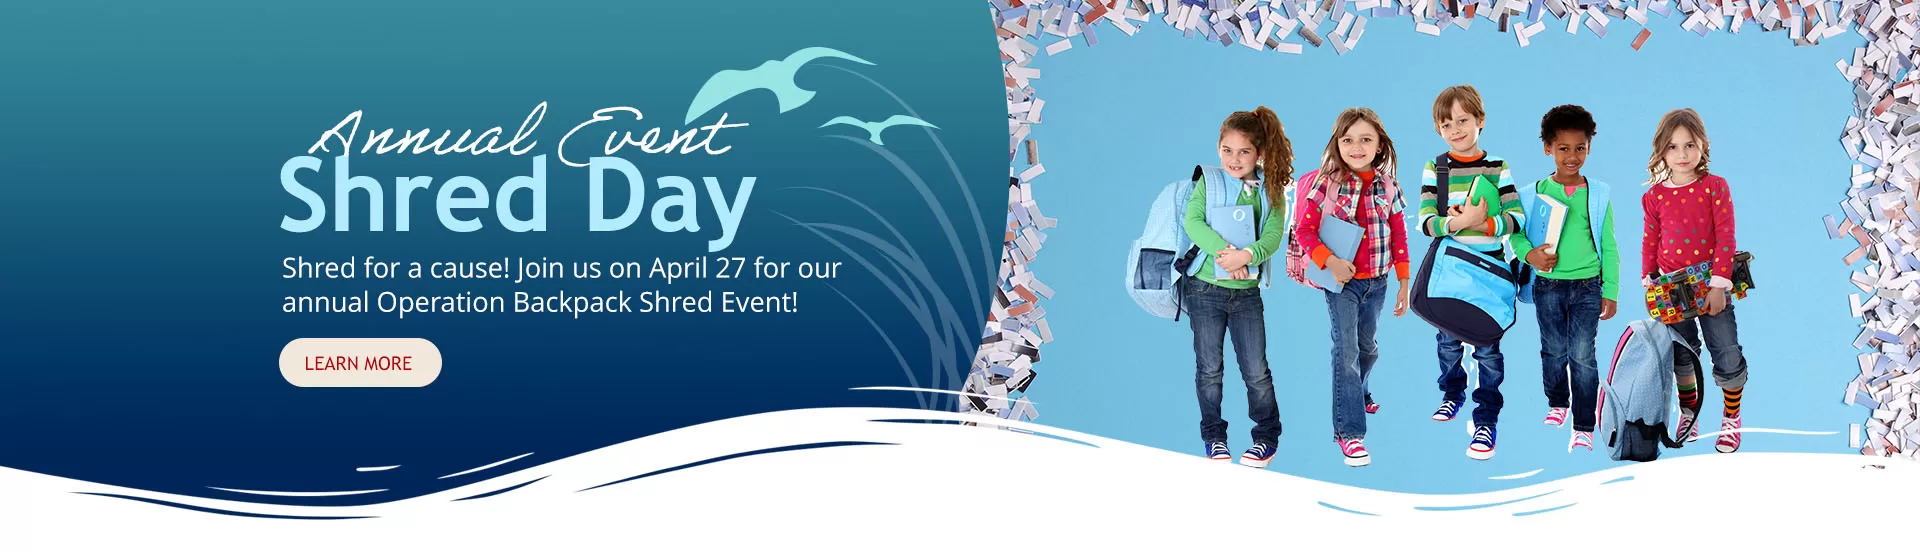 Shred Day Is April 27 from 10am to 1pm at the Thalia Branch